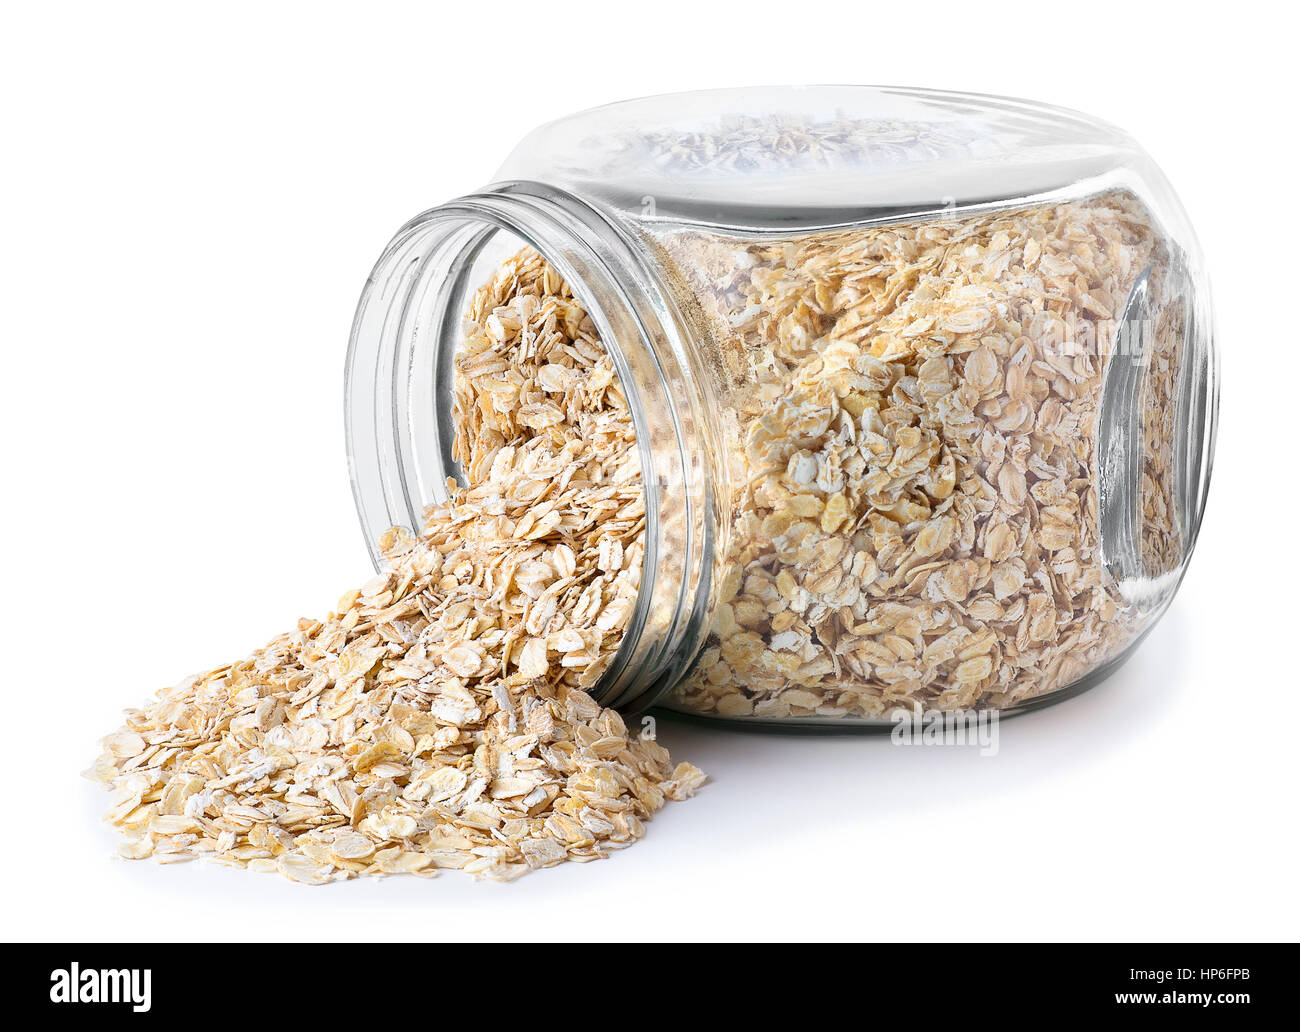 transparent glass jar with rolled oats isolated on white background. Glass jar with oatmeal flakes lying on side isolated on white background. Scatter Stock Photo